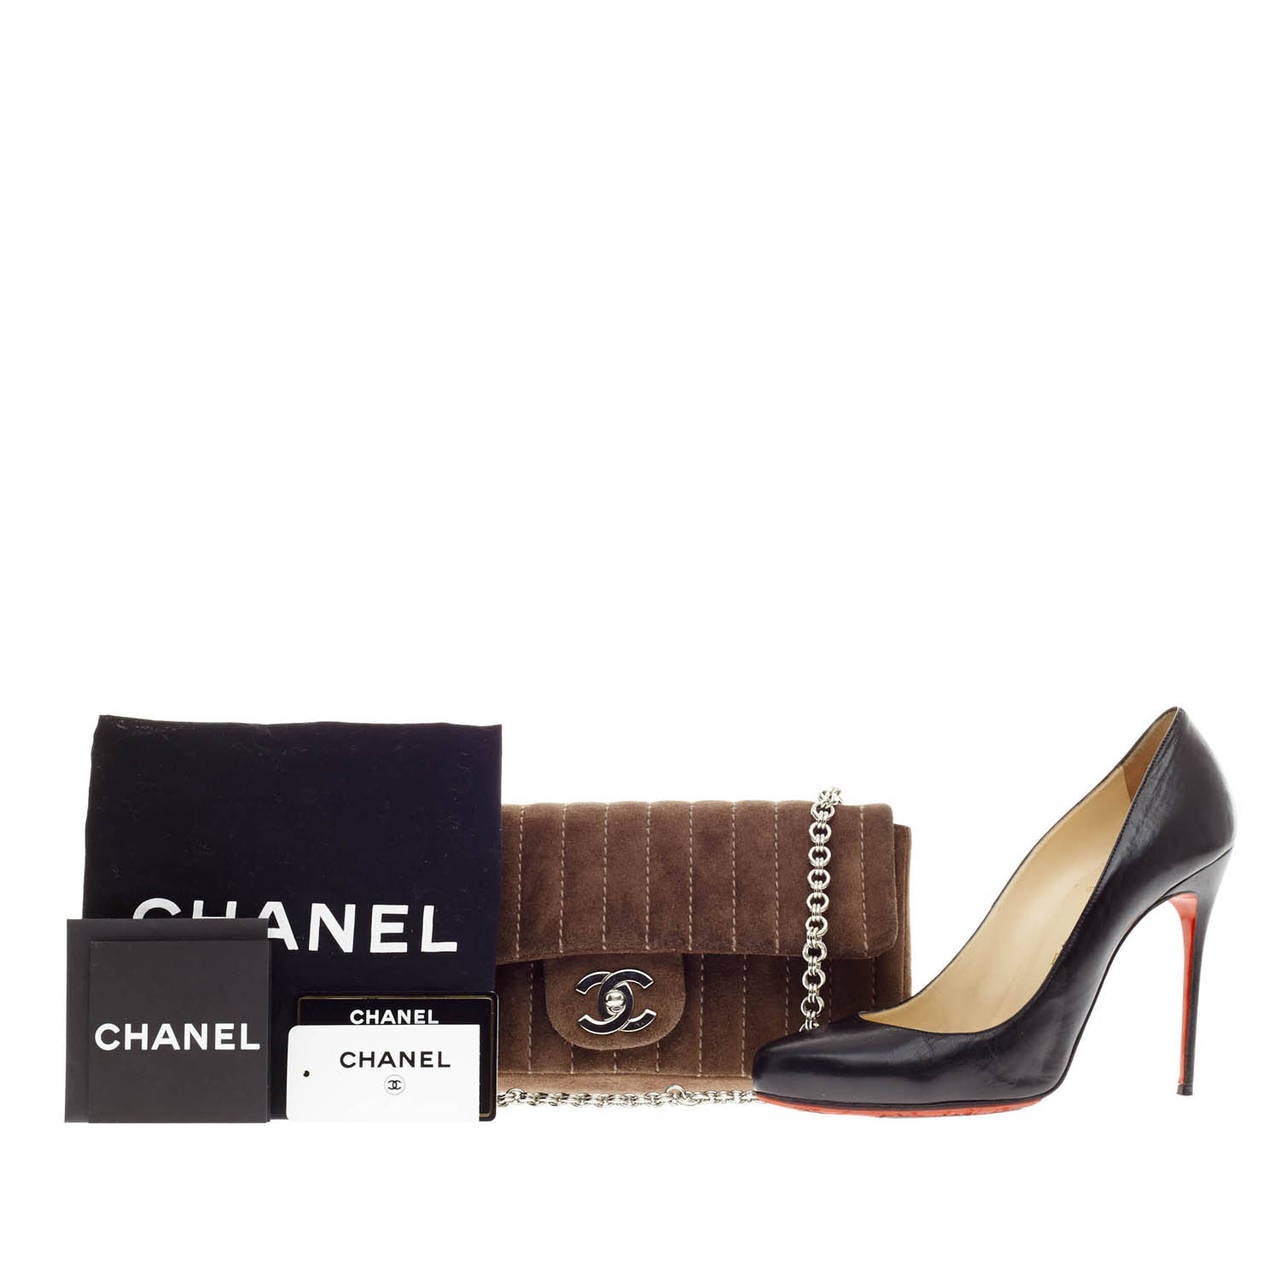 This authentic Chanel Mademoiselle Vertical Suede in size Small is a luxurious accessory made for casual and evening looks. Crafted from smooth brown suede with light brown vertical contrast stitching, this flap bag features polished silver-tone